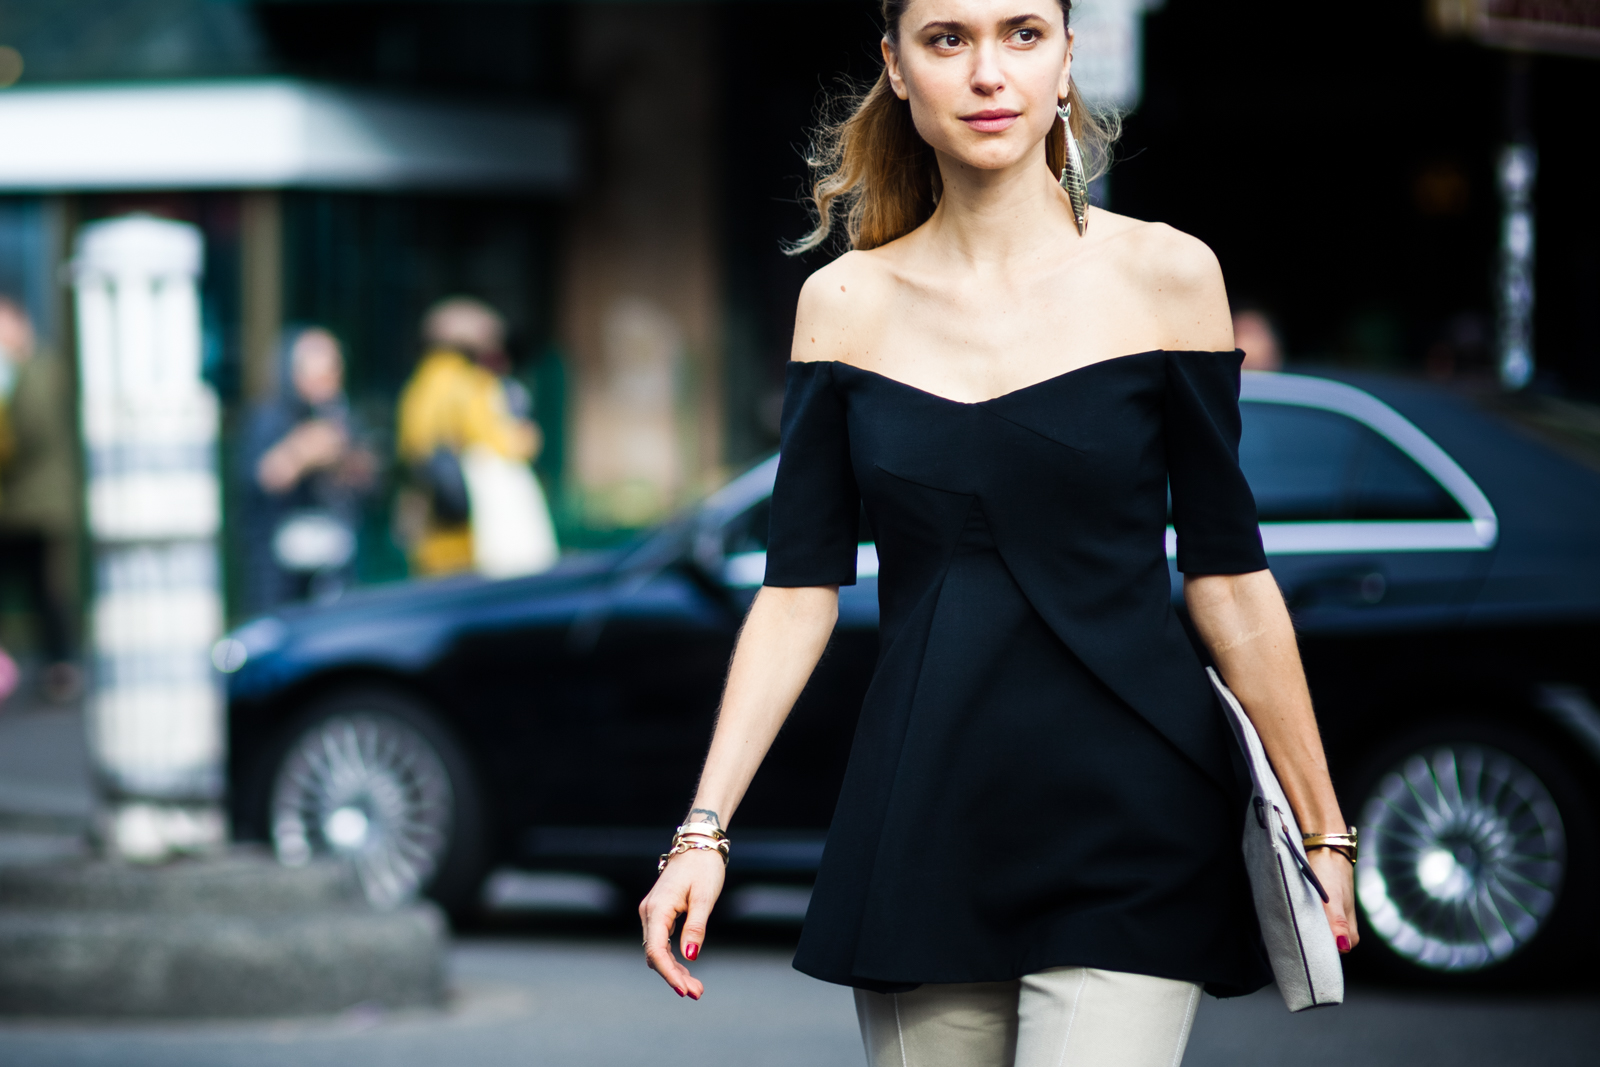 Danish stylist Pernille Teisbaek wearing a black top and a gold fish earring before the Stella McCartney fashion show in Paris, France